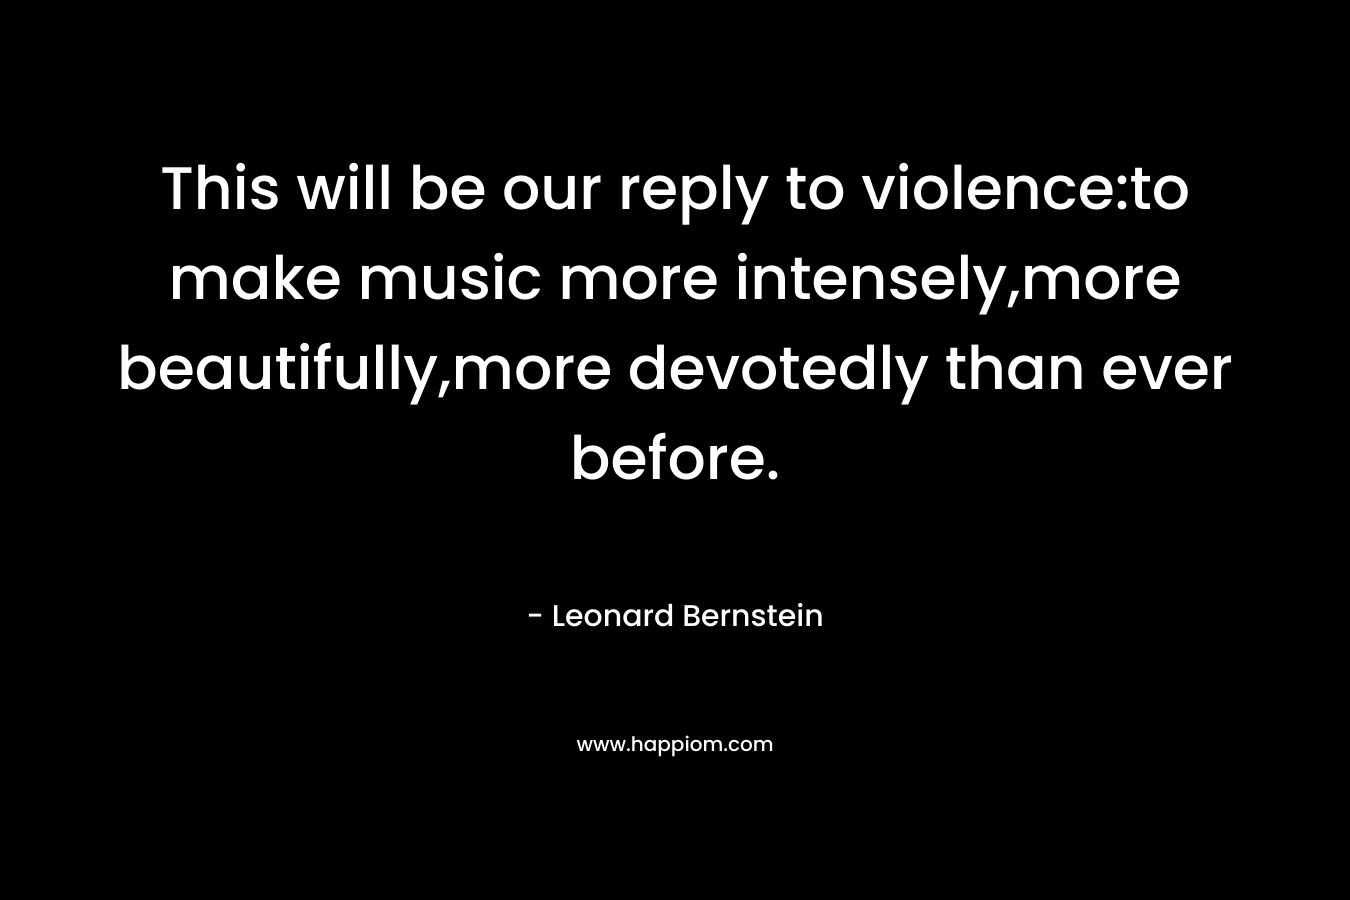 This will be our reply to violence:to make music more intensely,more beautifully,more devotedly than ever before. – Leonard Bernstein